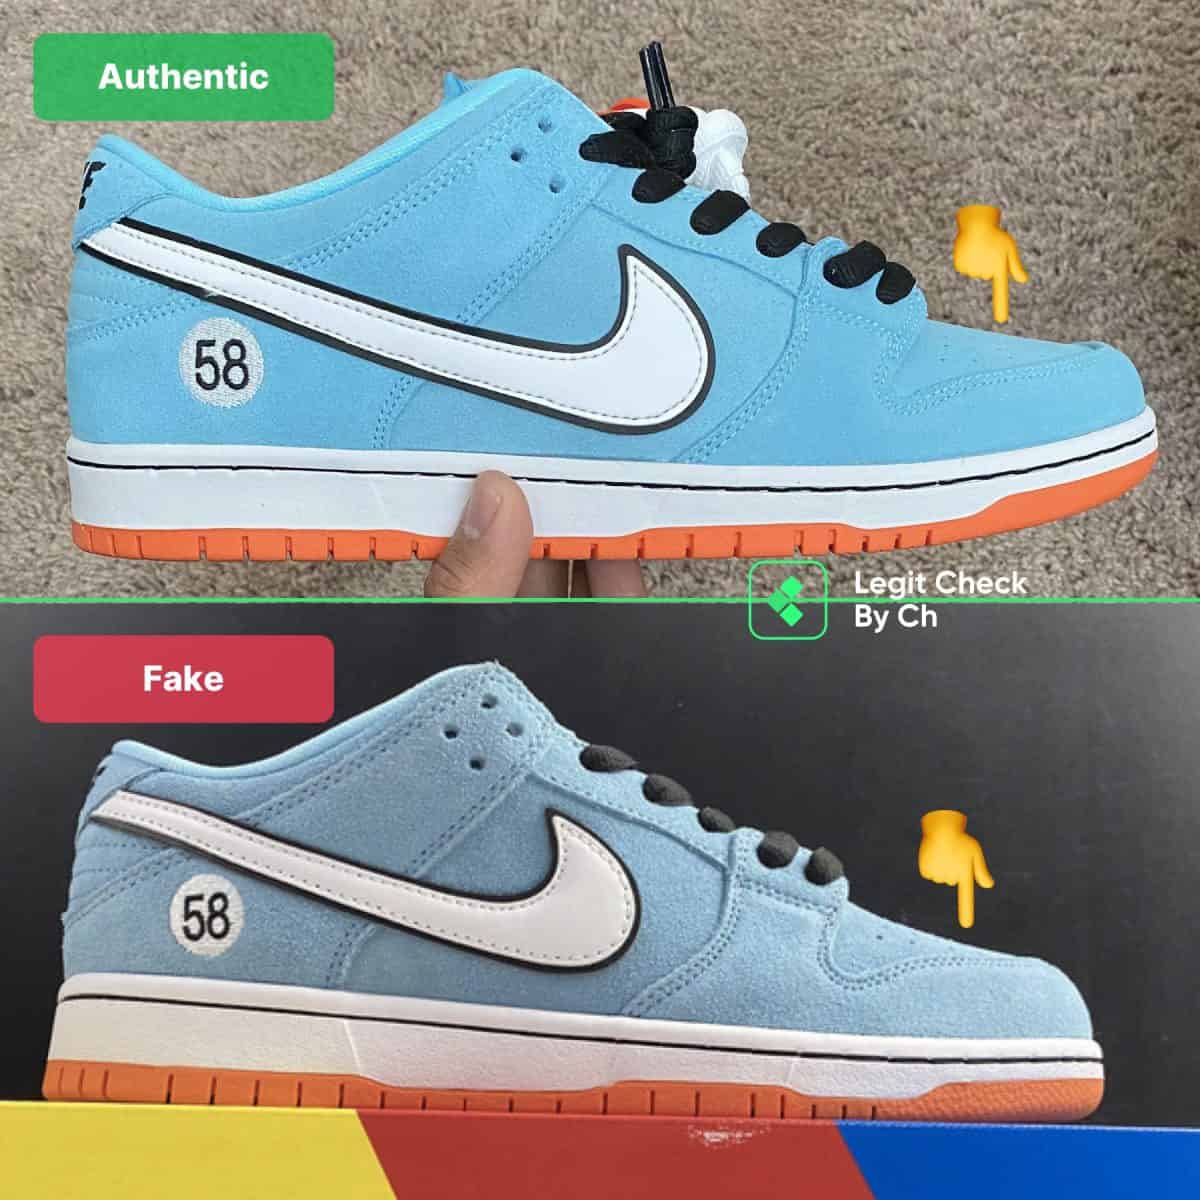 how to spot fake 58 club gulf dunks